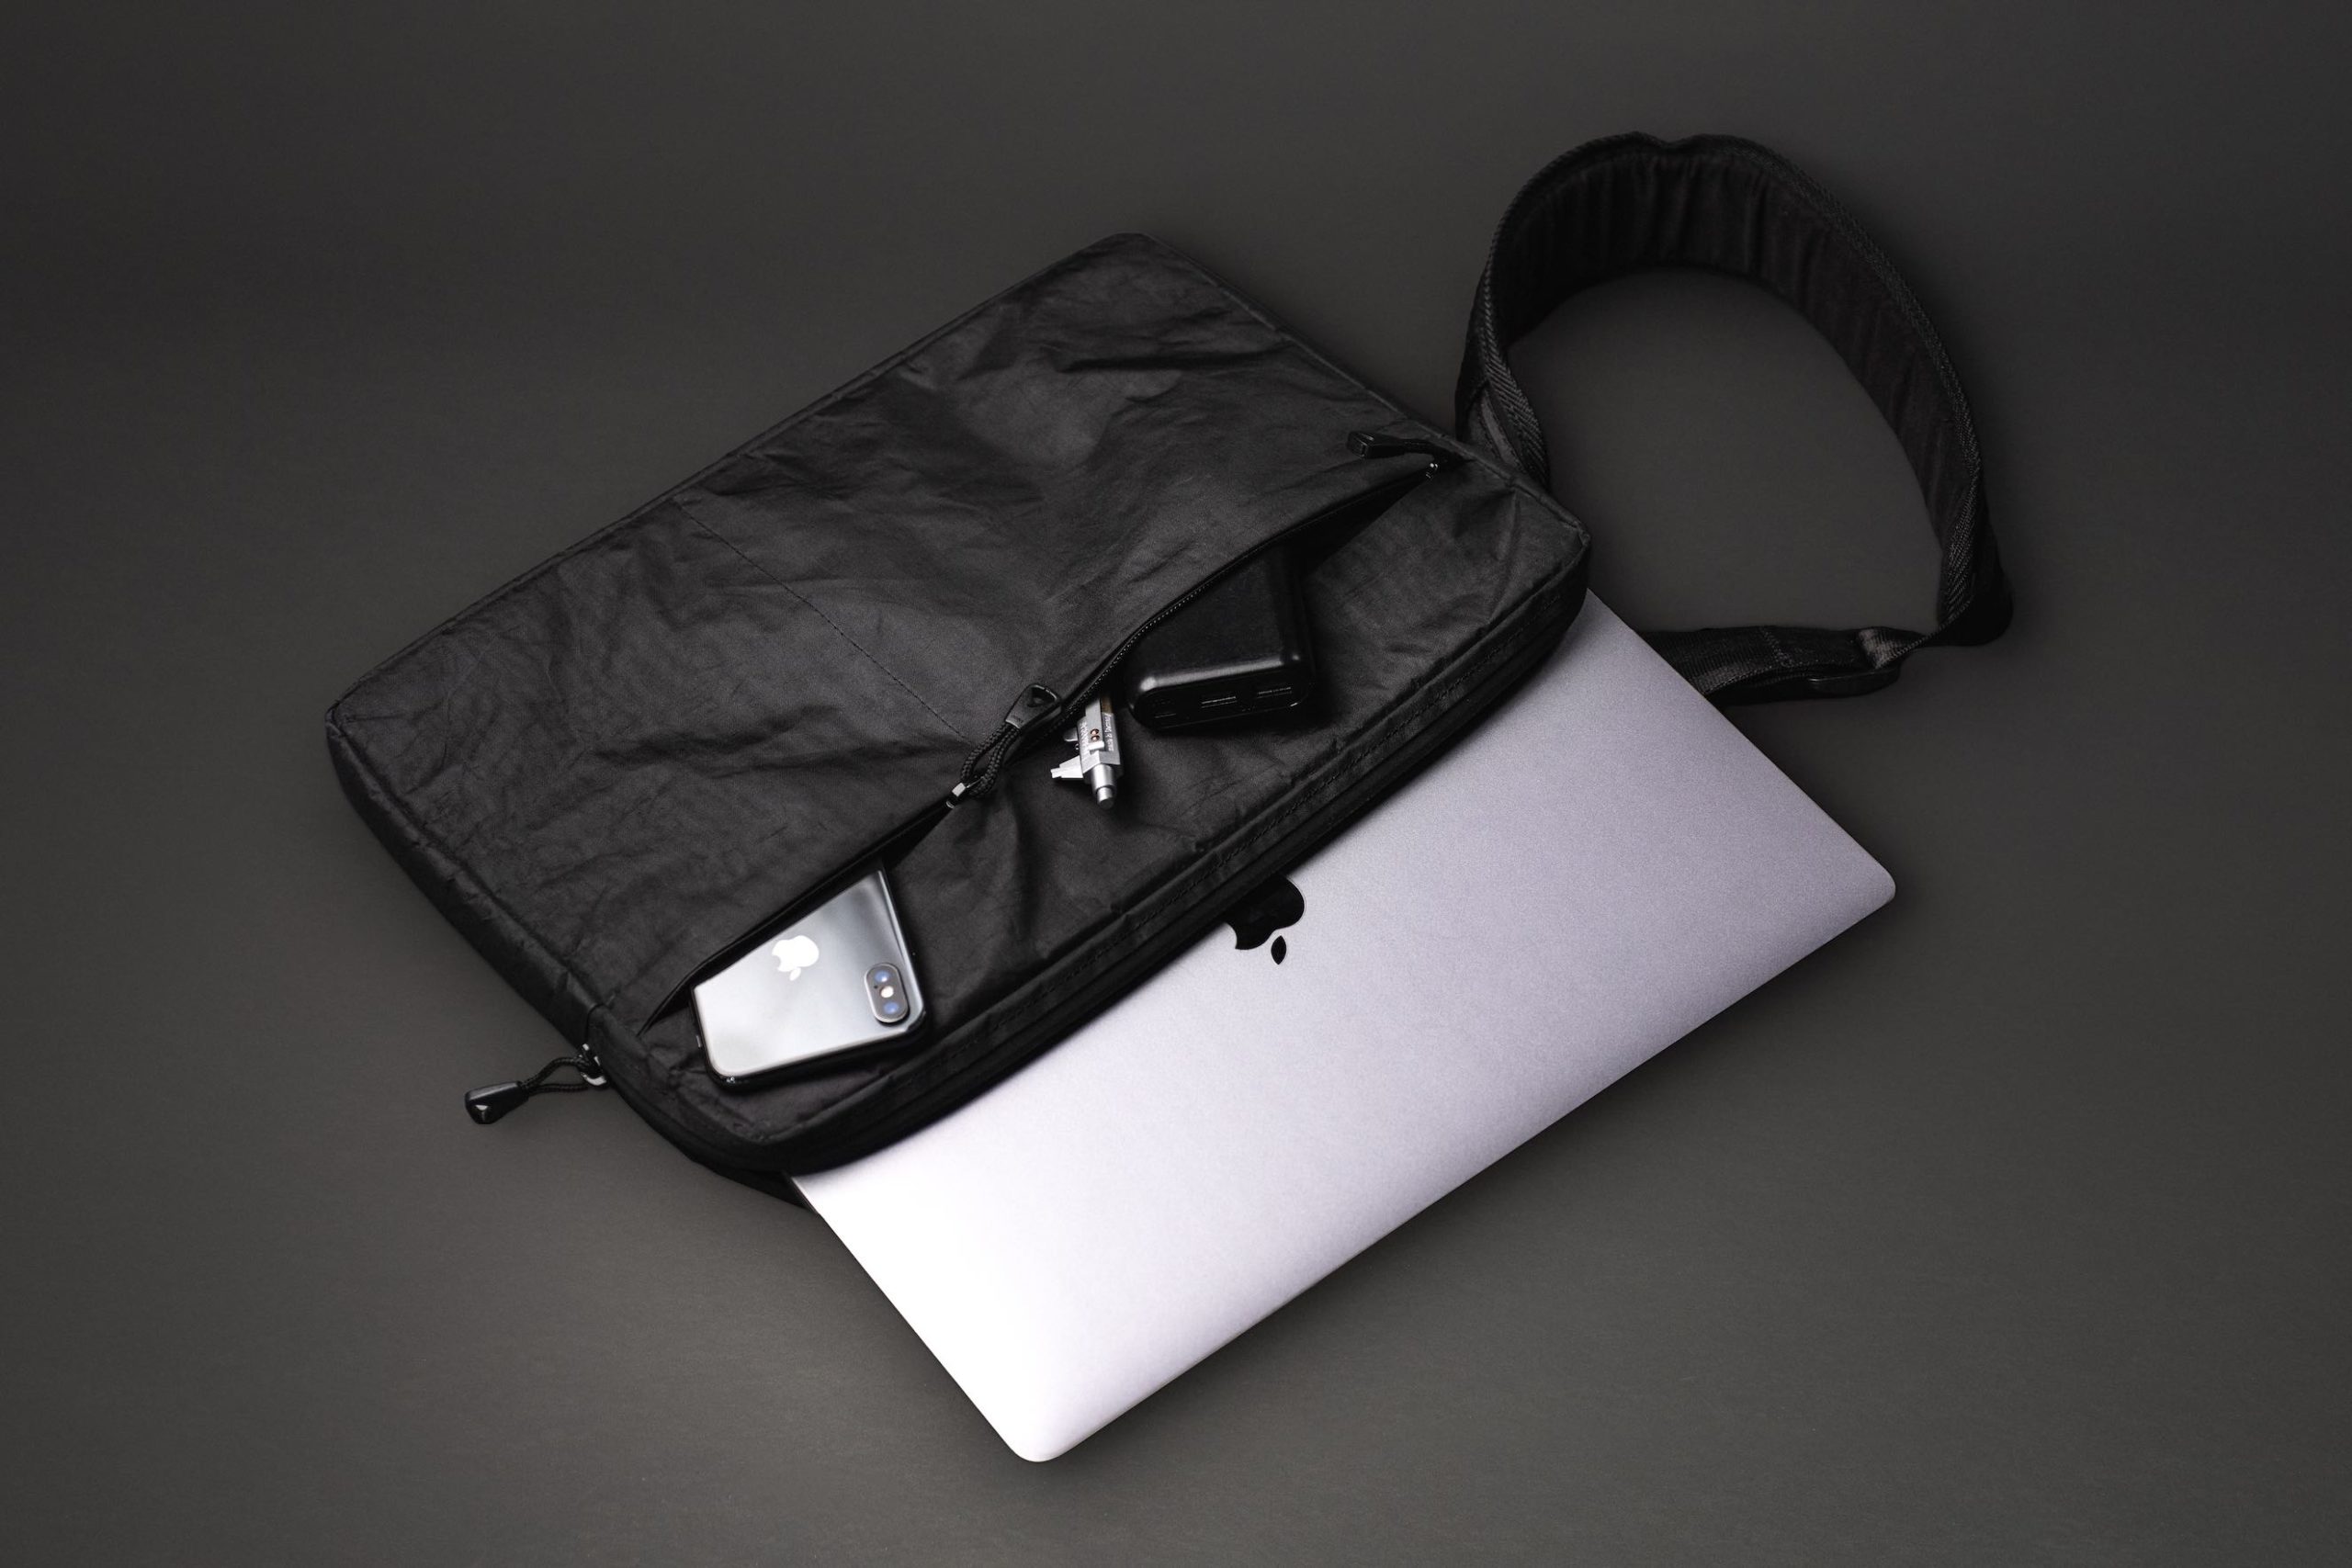 Black Mile Travel Bag Product Photography Laptop bag with iphone in pocket